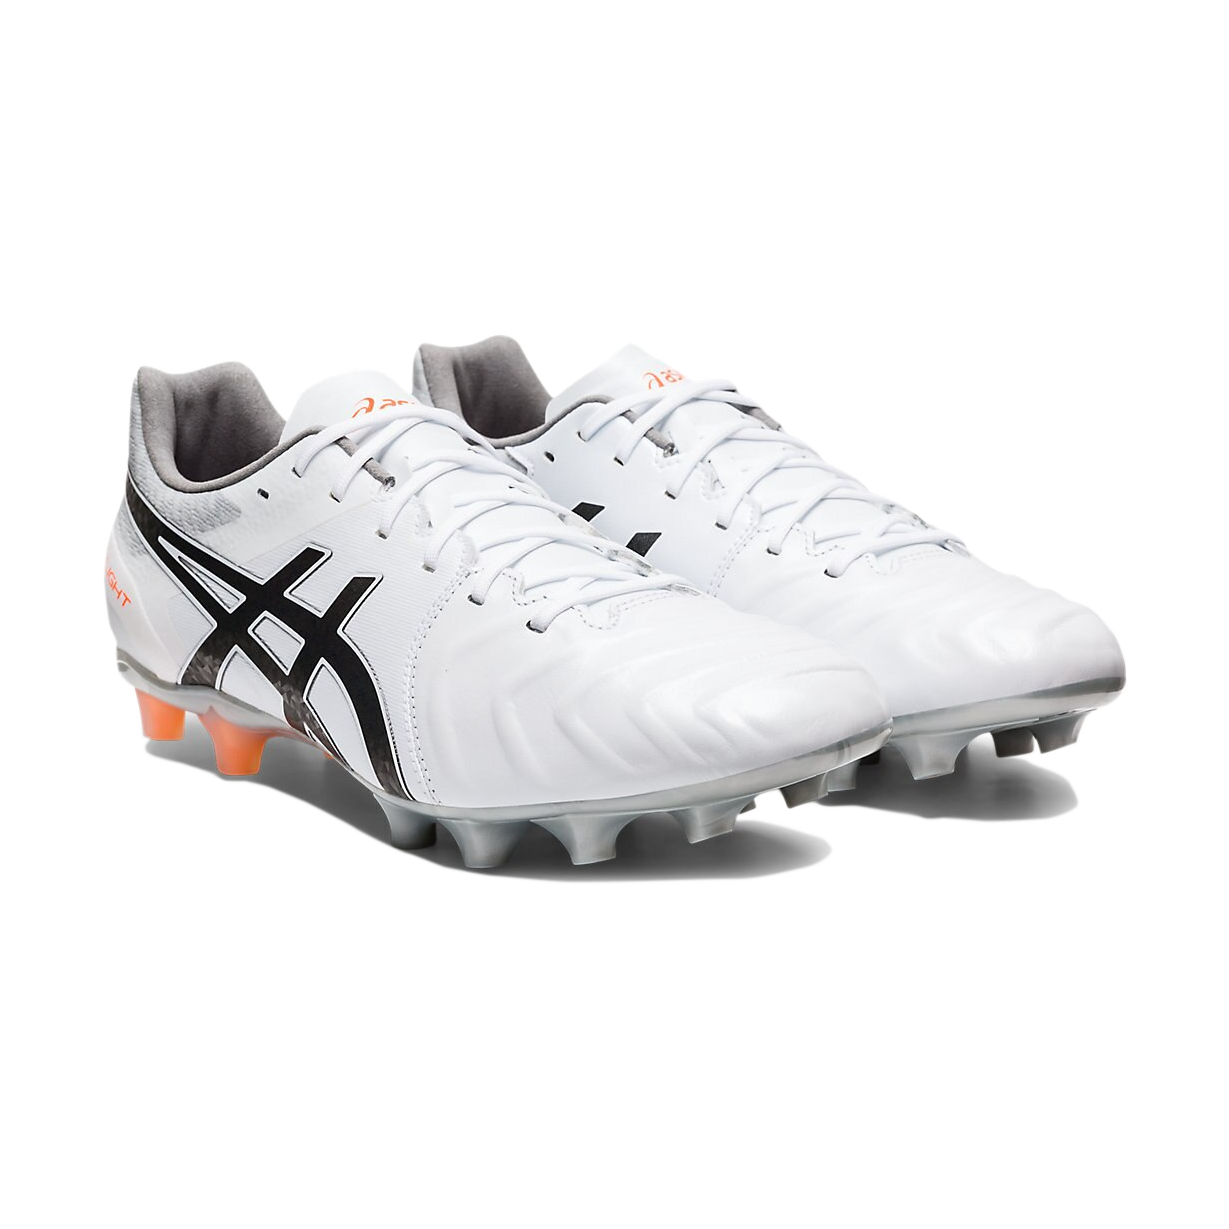 Rugby Boots & Cleats | Asics, X Blades & Concave - TR7Store